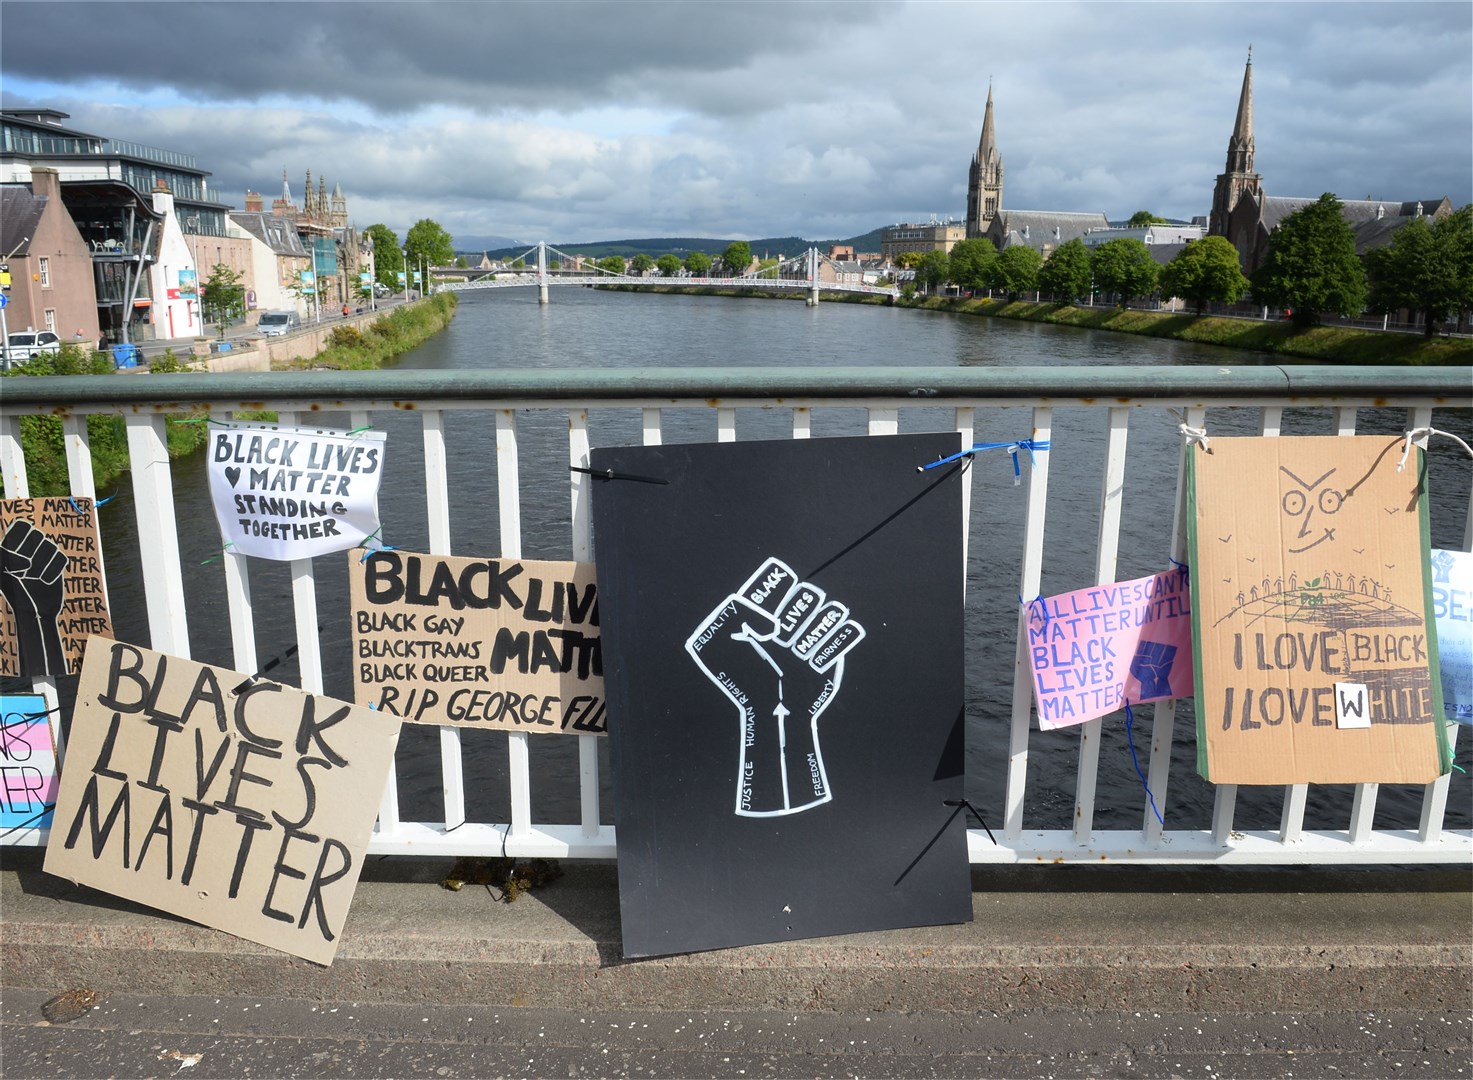 Black Lves Matter posters on the Ness Bridge Picture: Gary Anthony